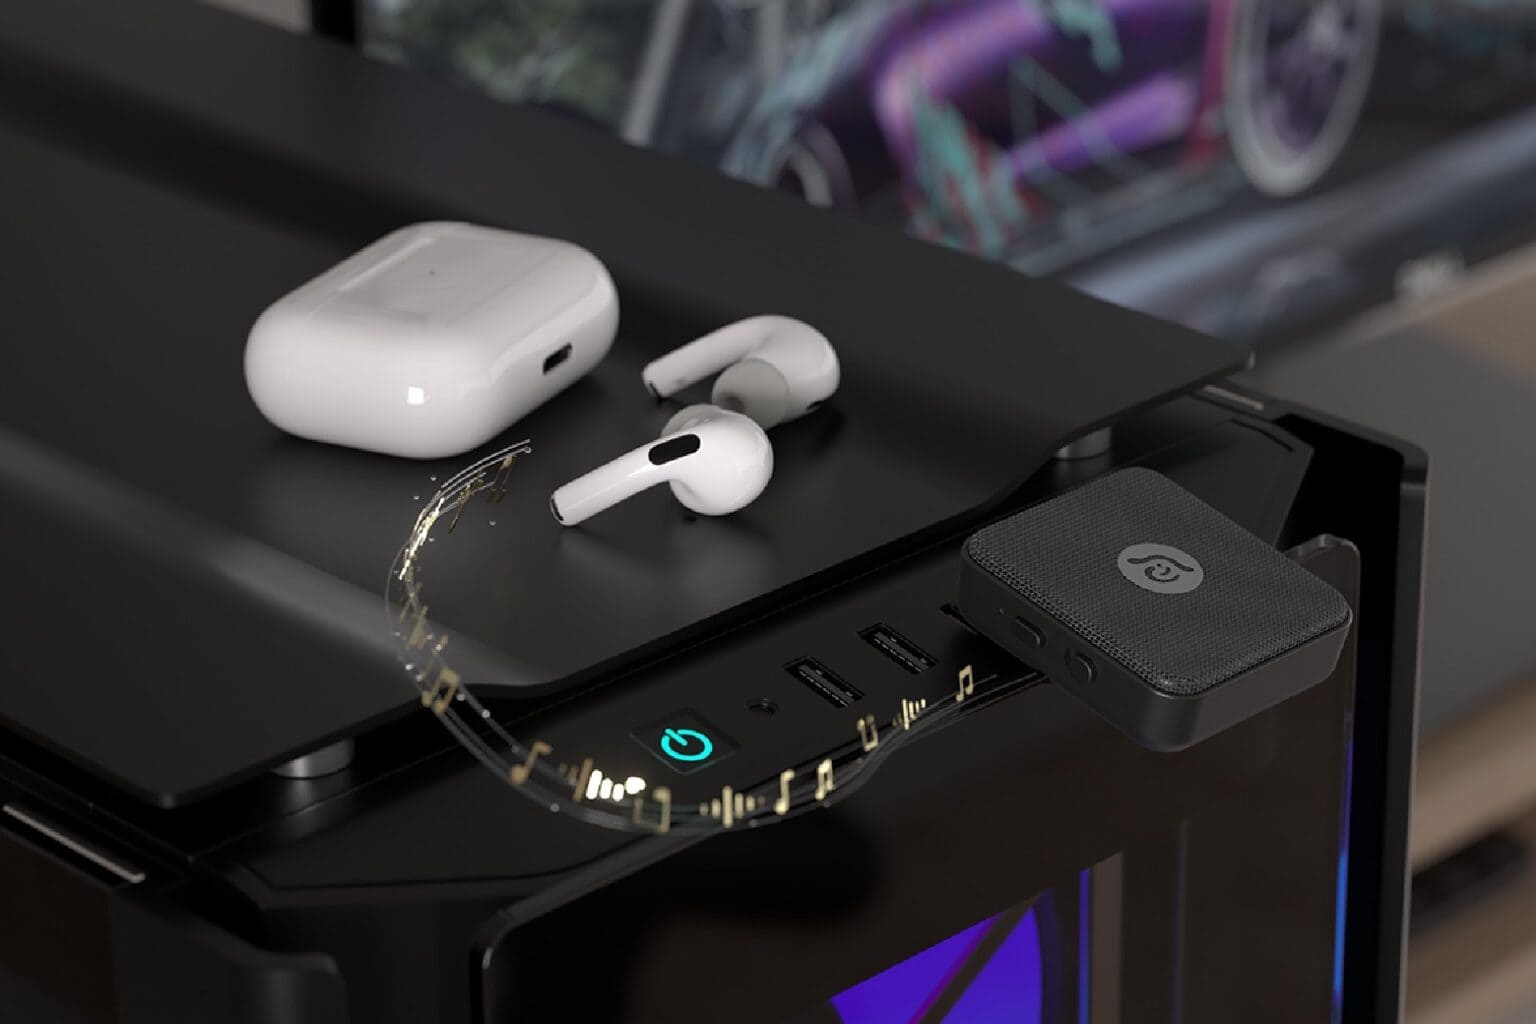 Elevate your connections with a $46 Bluetooth transmitter and receiver.